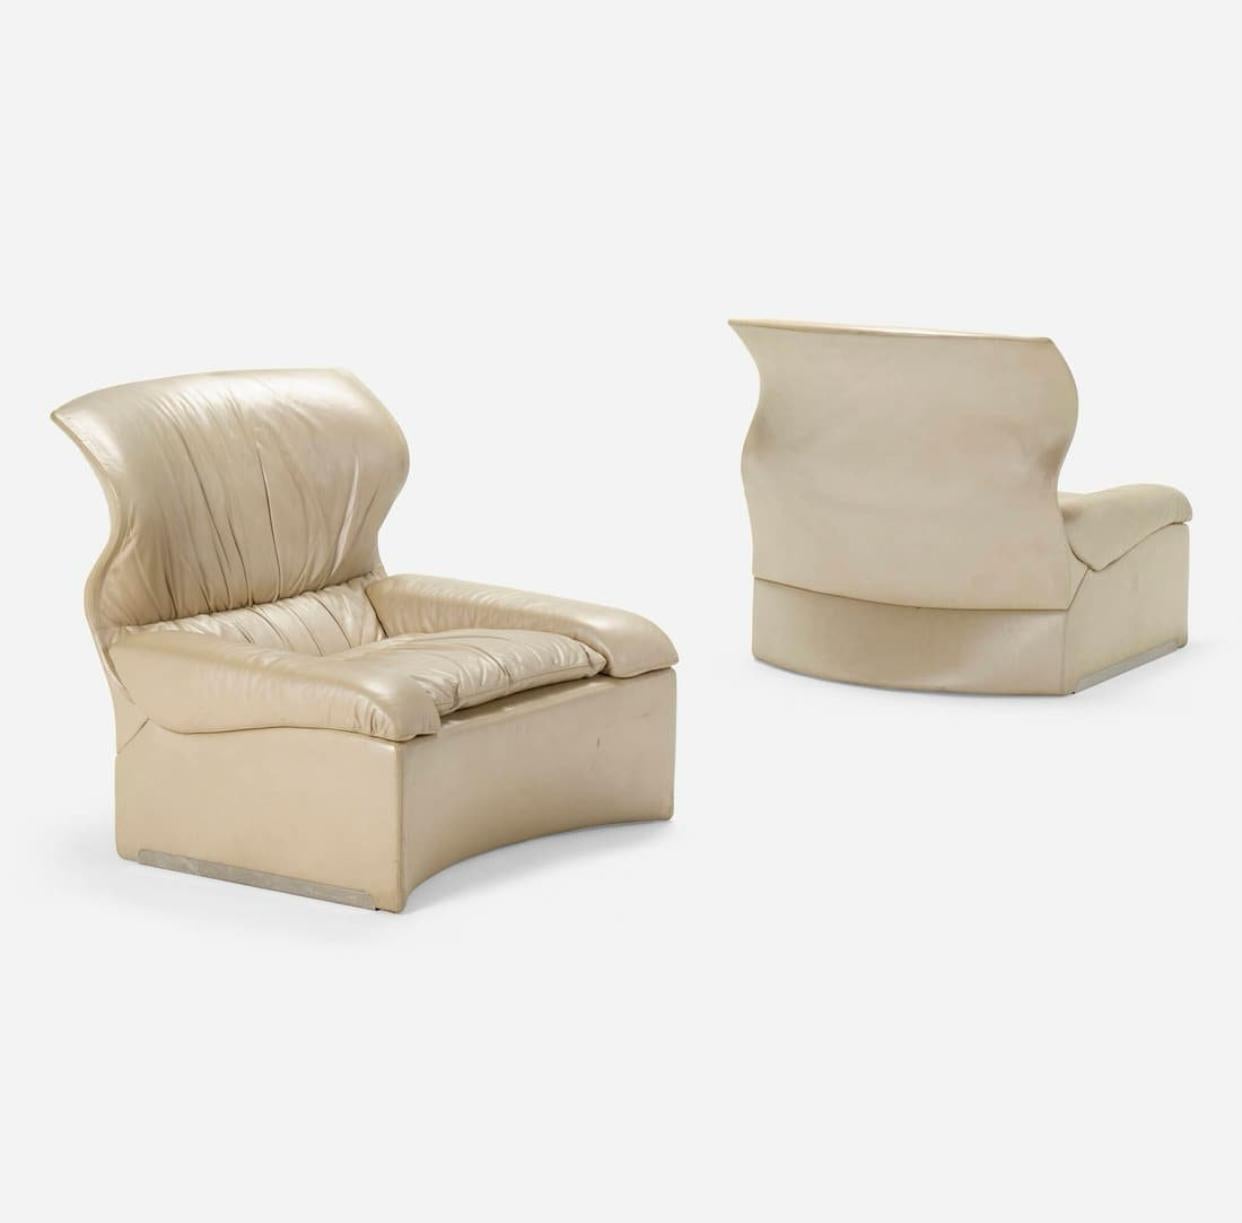 Pair of organic shaped, cream leather lounge chairs by Giovanni Offredi for Saporiti. A classic design by Offredi. Who began working with the Saporiti brothers in the late 1960s. The organic design of the curve in the chair back resembles the